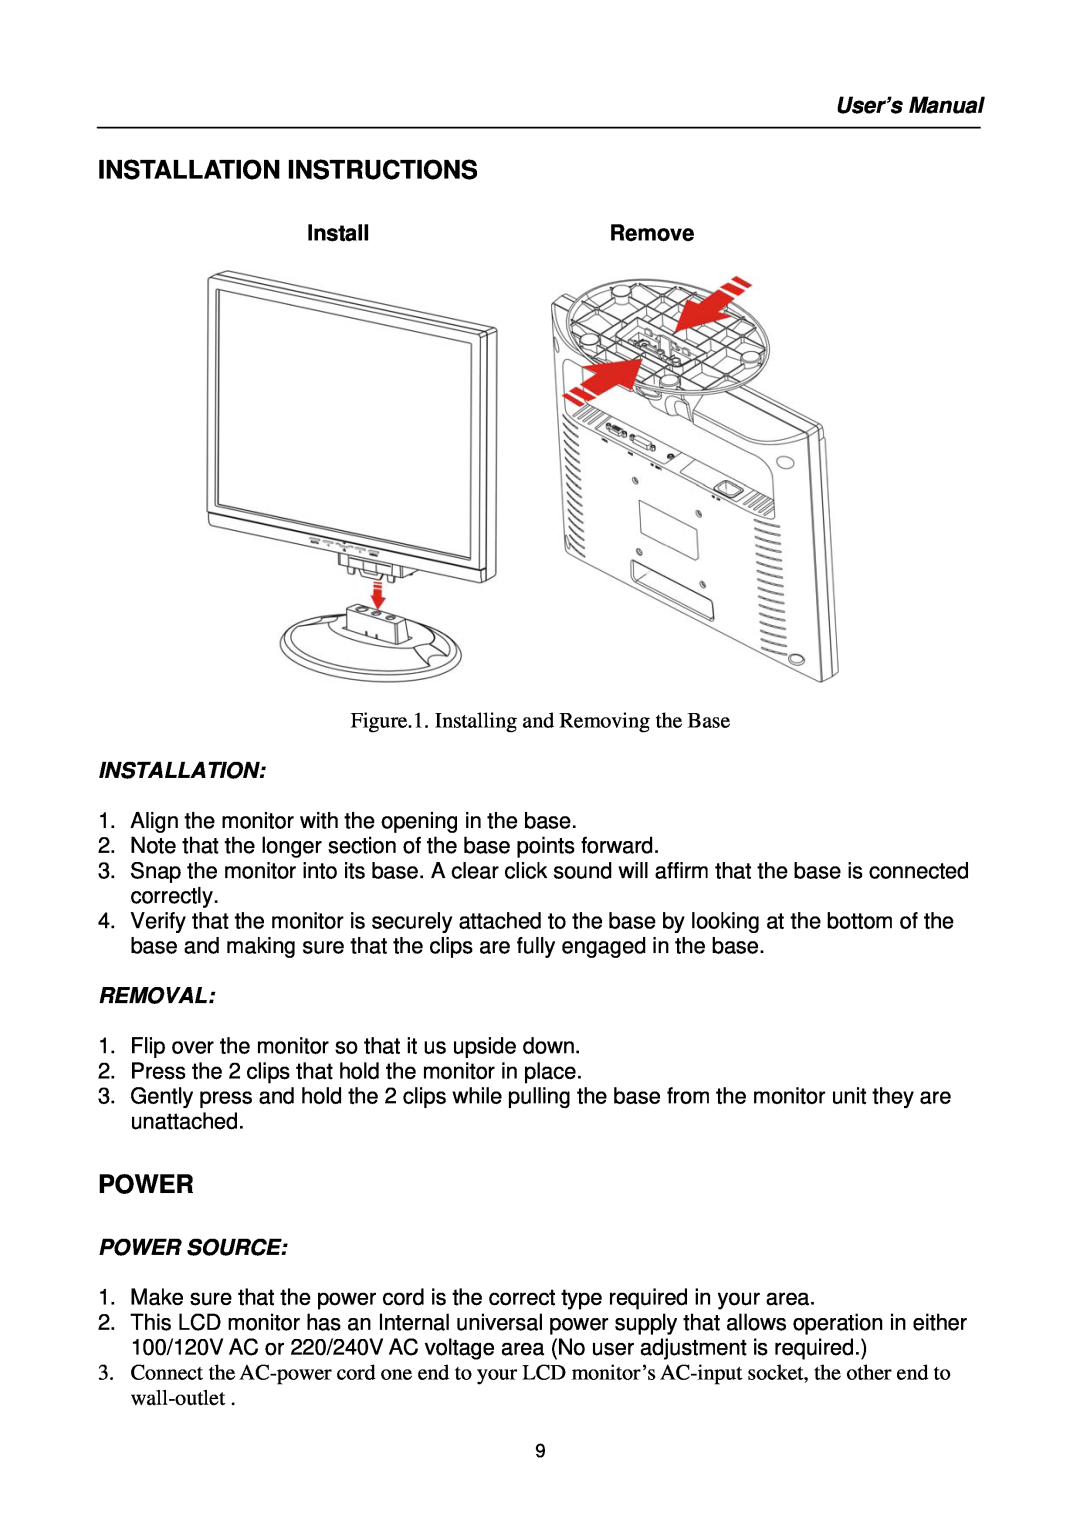 Hanns.G HS191 user manual Installation Instructions, InstallRemove, Removal, Power Source, User’s Manual 